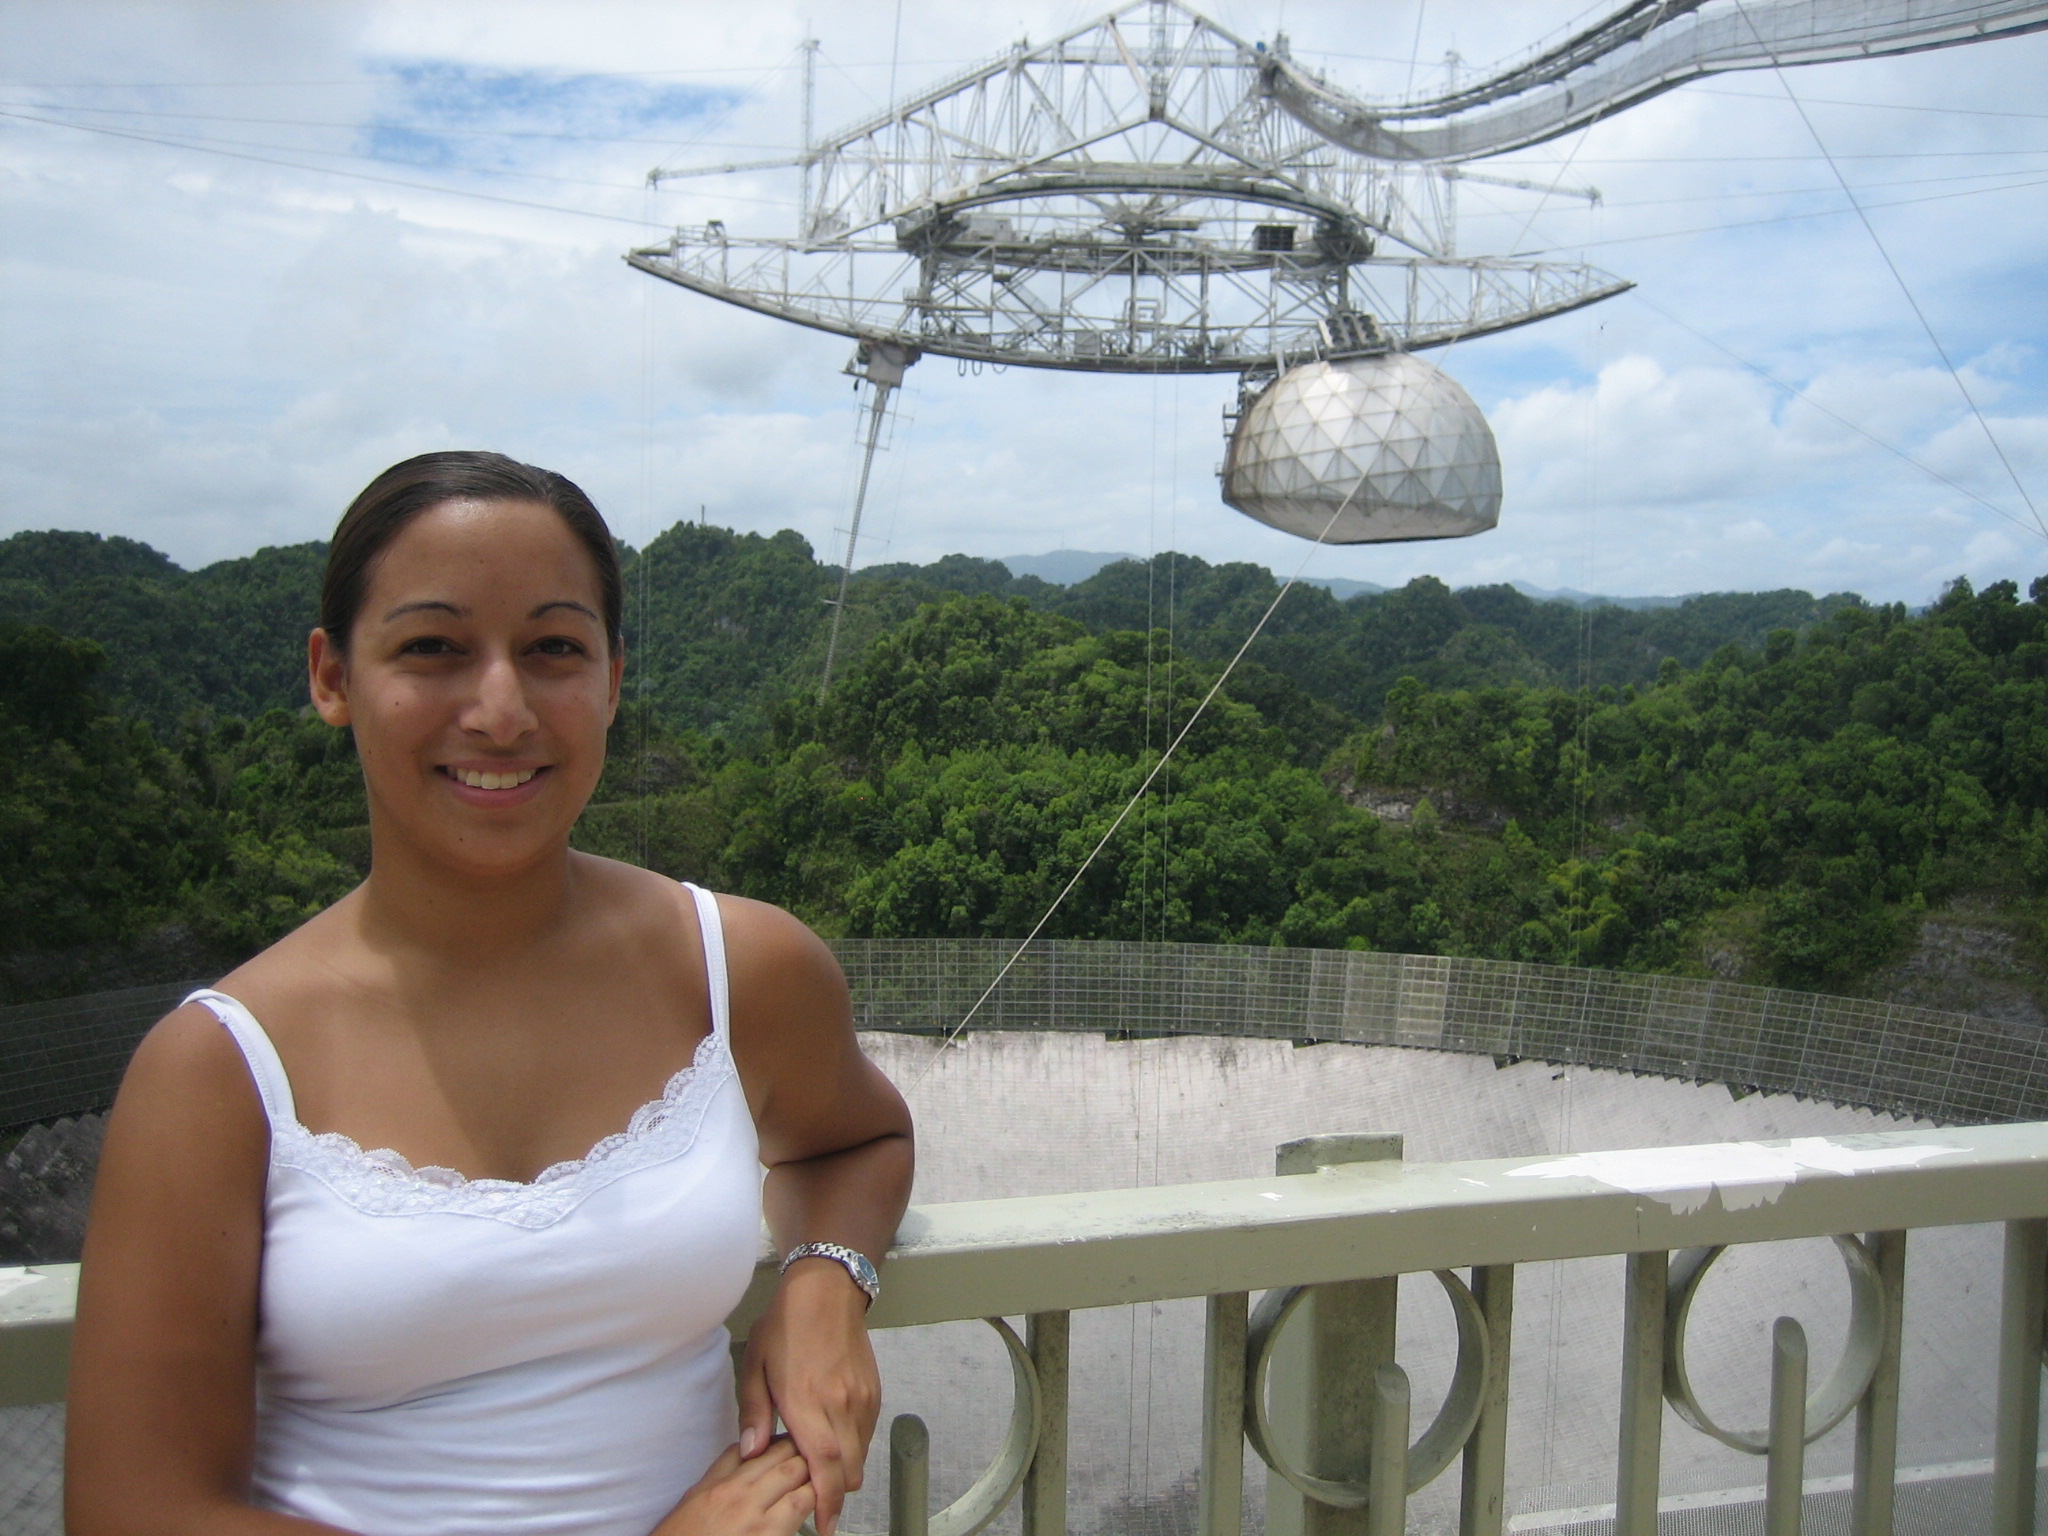 With the Arecibo Telescope in Puerto Rico in 2006. The summer research experience I had at Arecibo played a major role in inspiring me to pursue astronomy in graduate school.